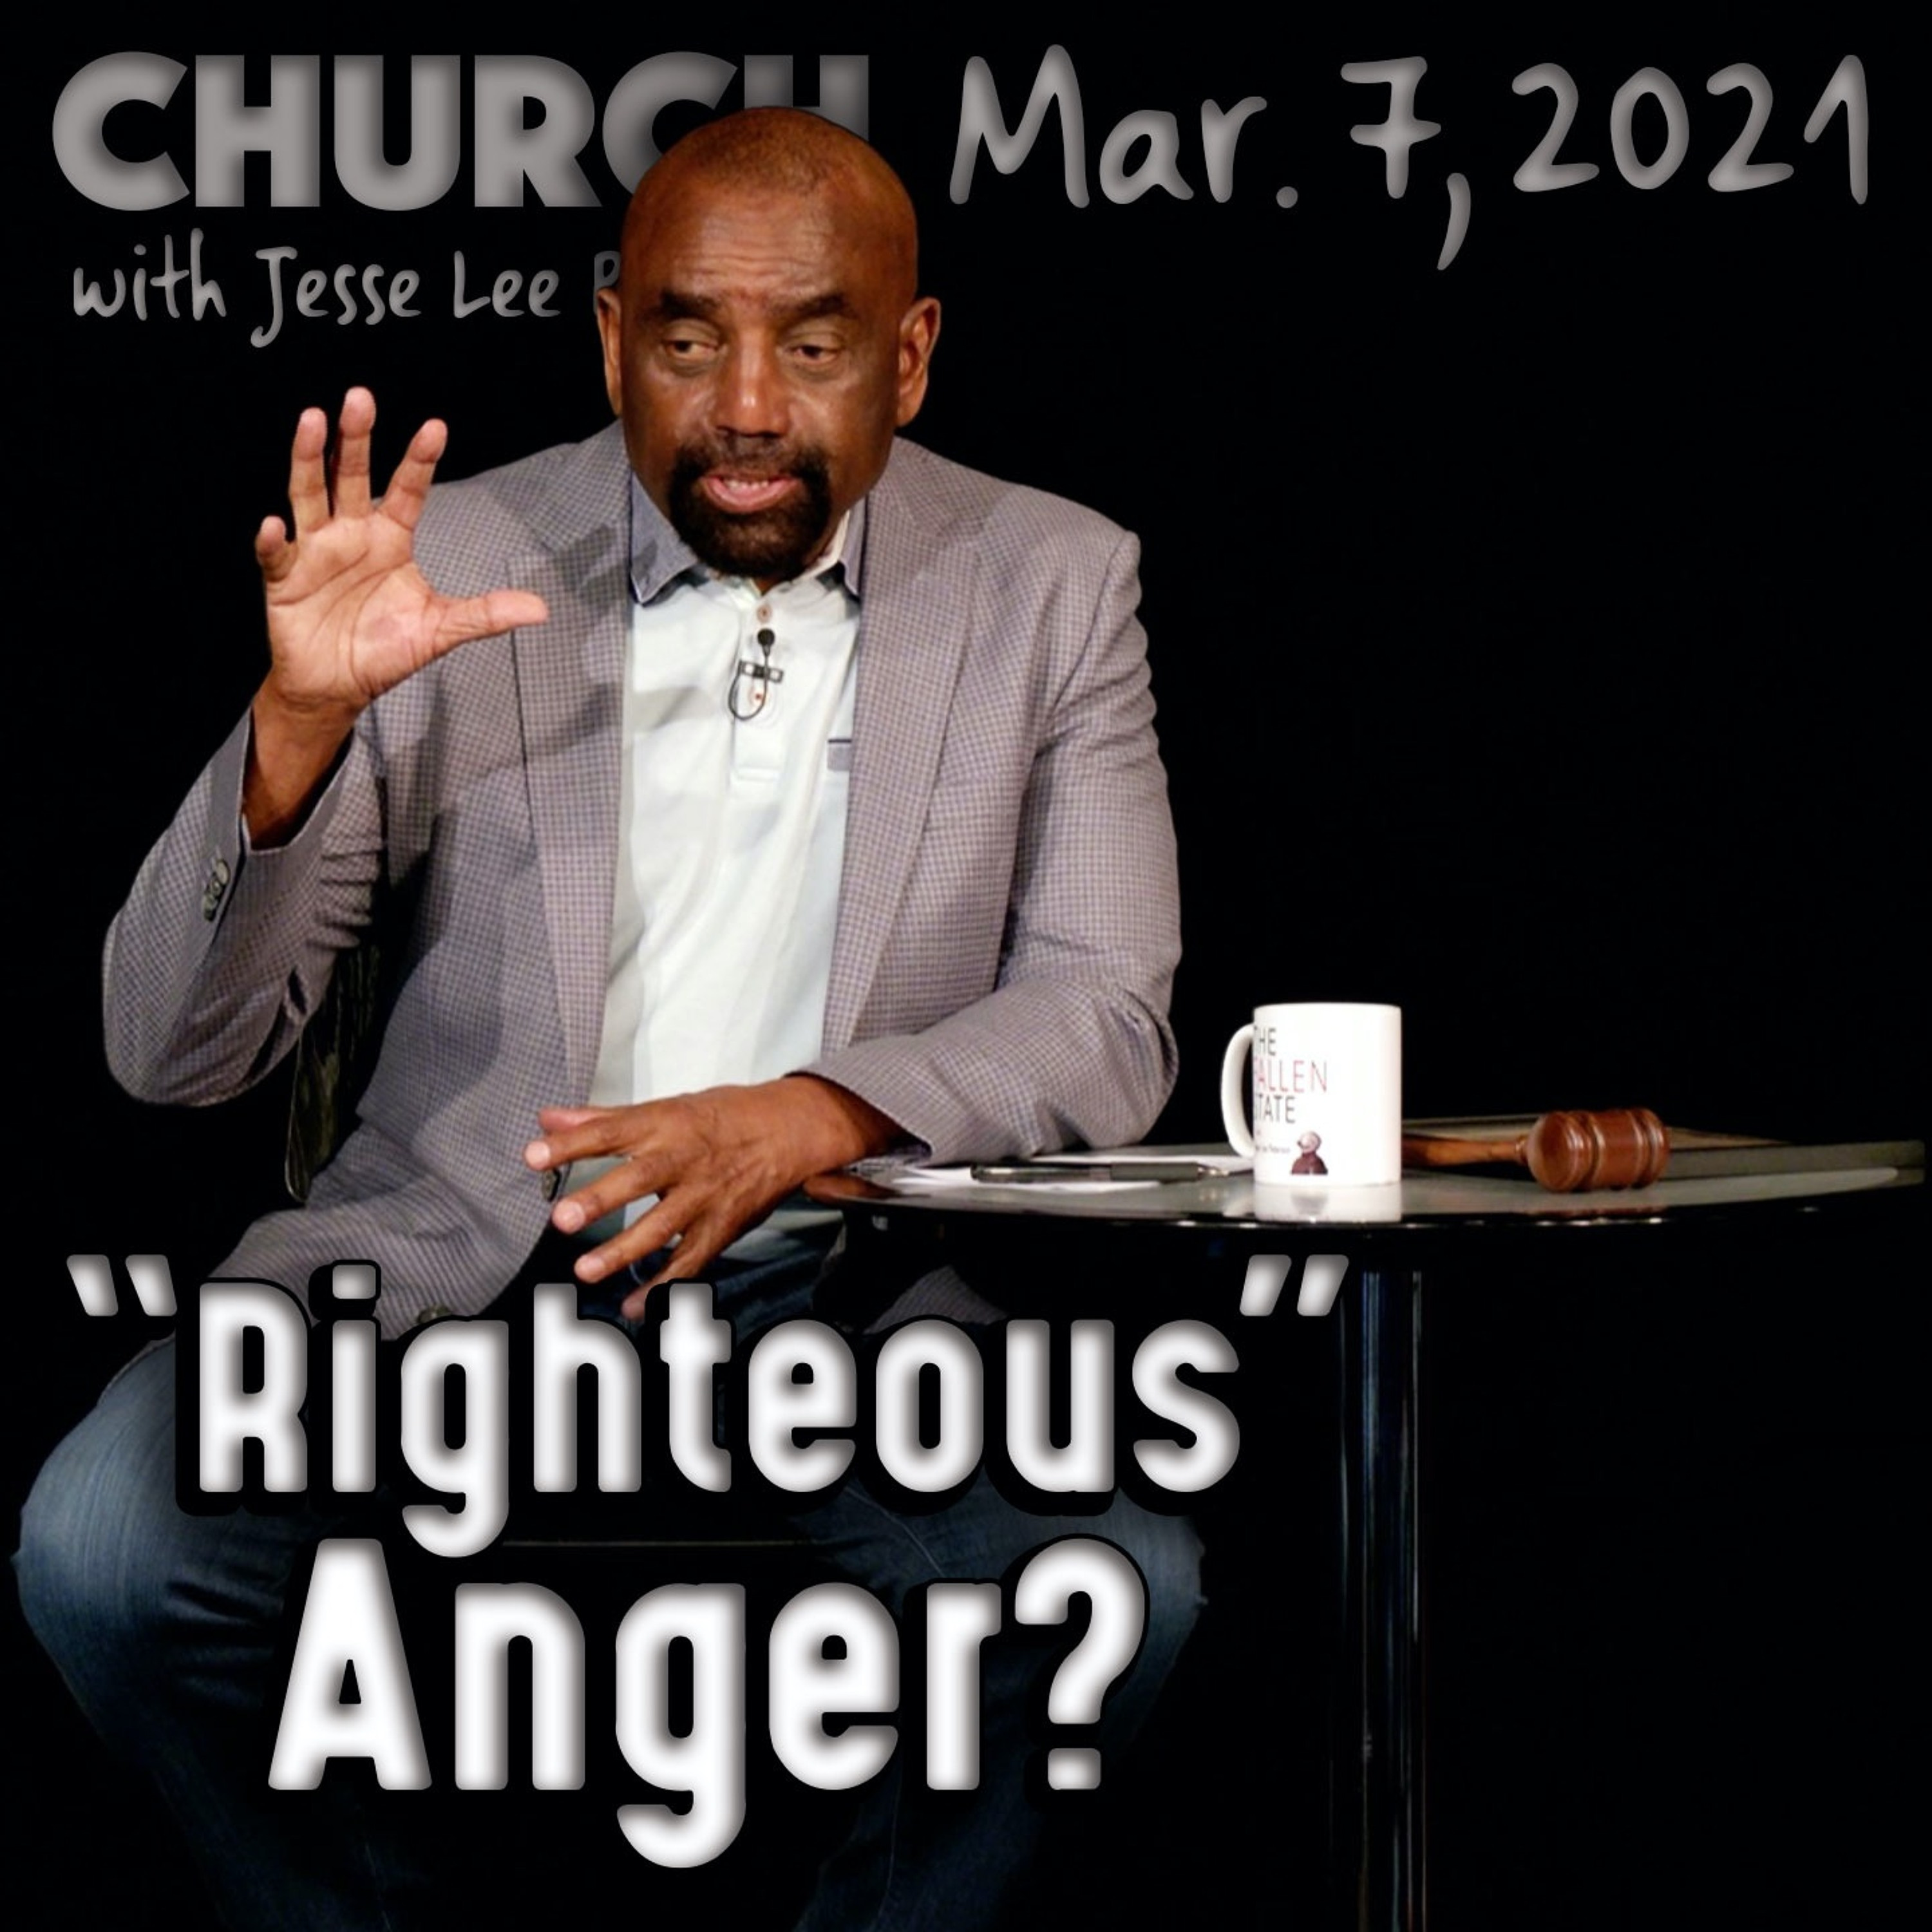 03/07/21 What Is ‘Righteous Anger’? (Church)